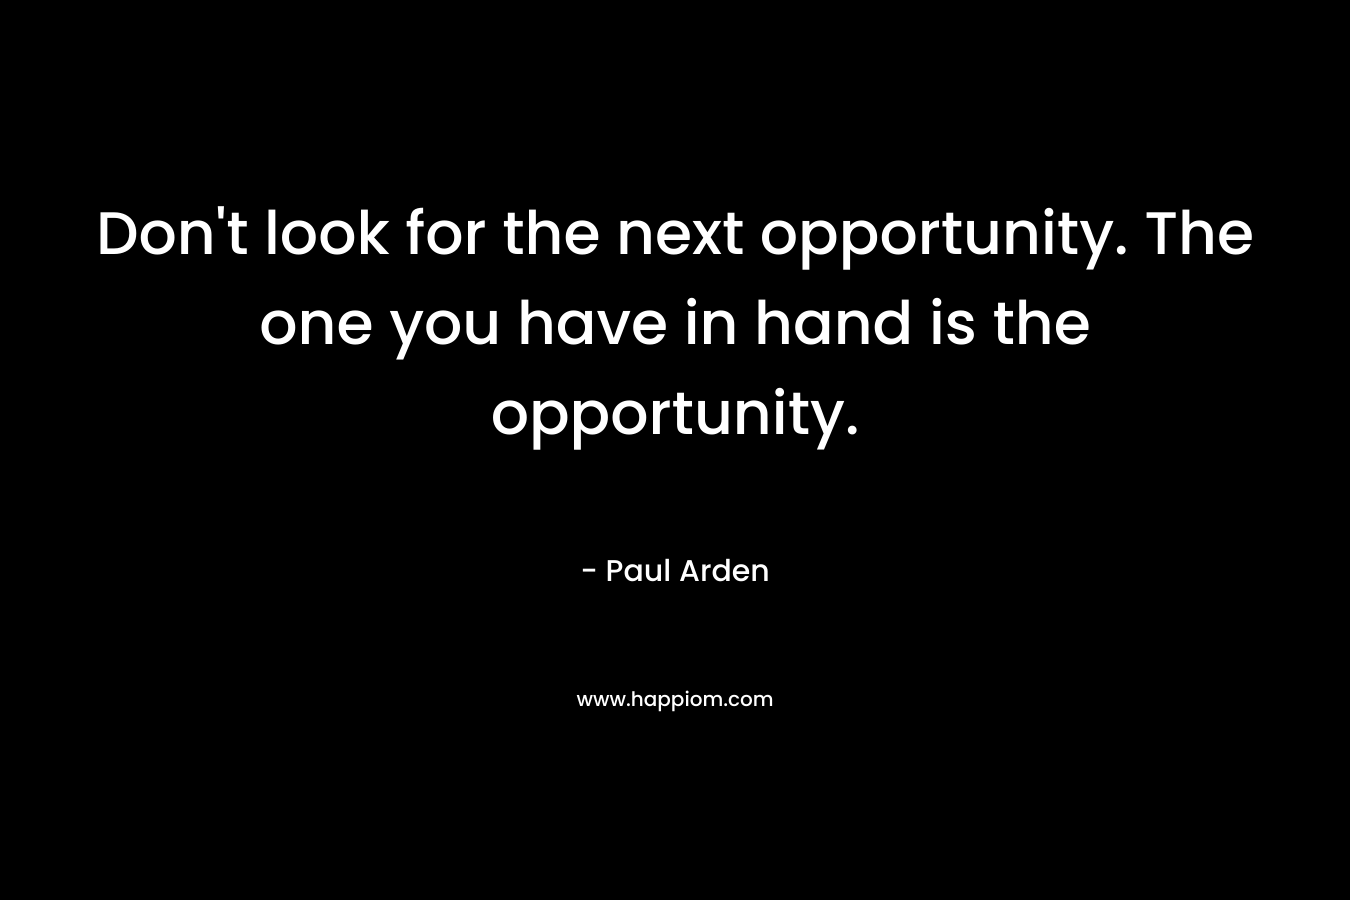 Don't look for the next opportunity. The one you have in hand is the opportunity.